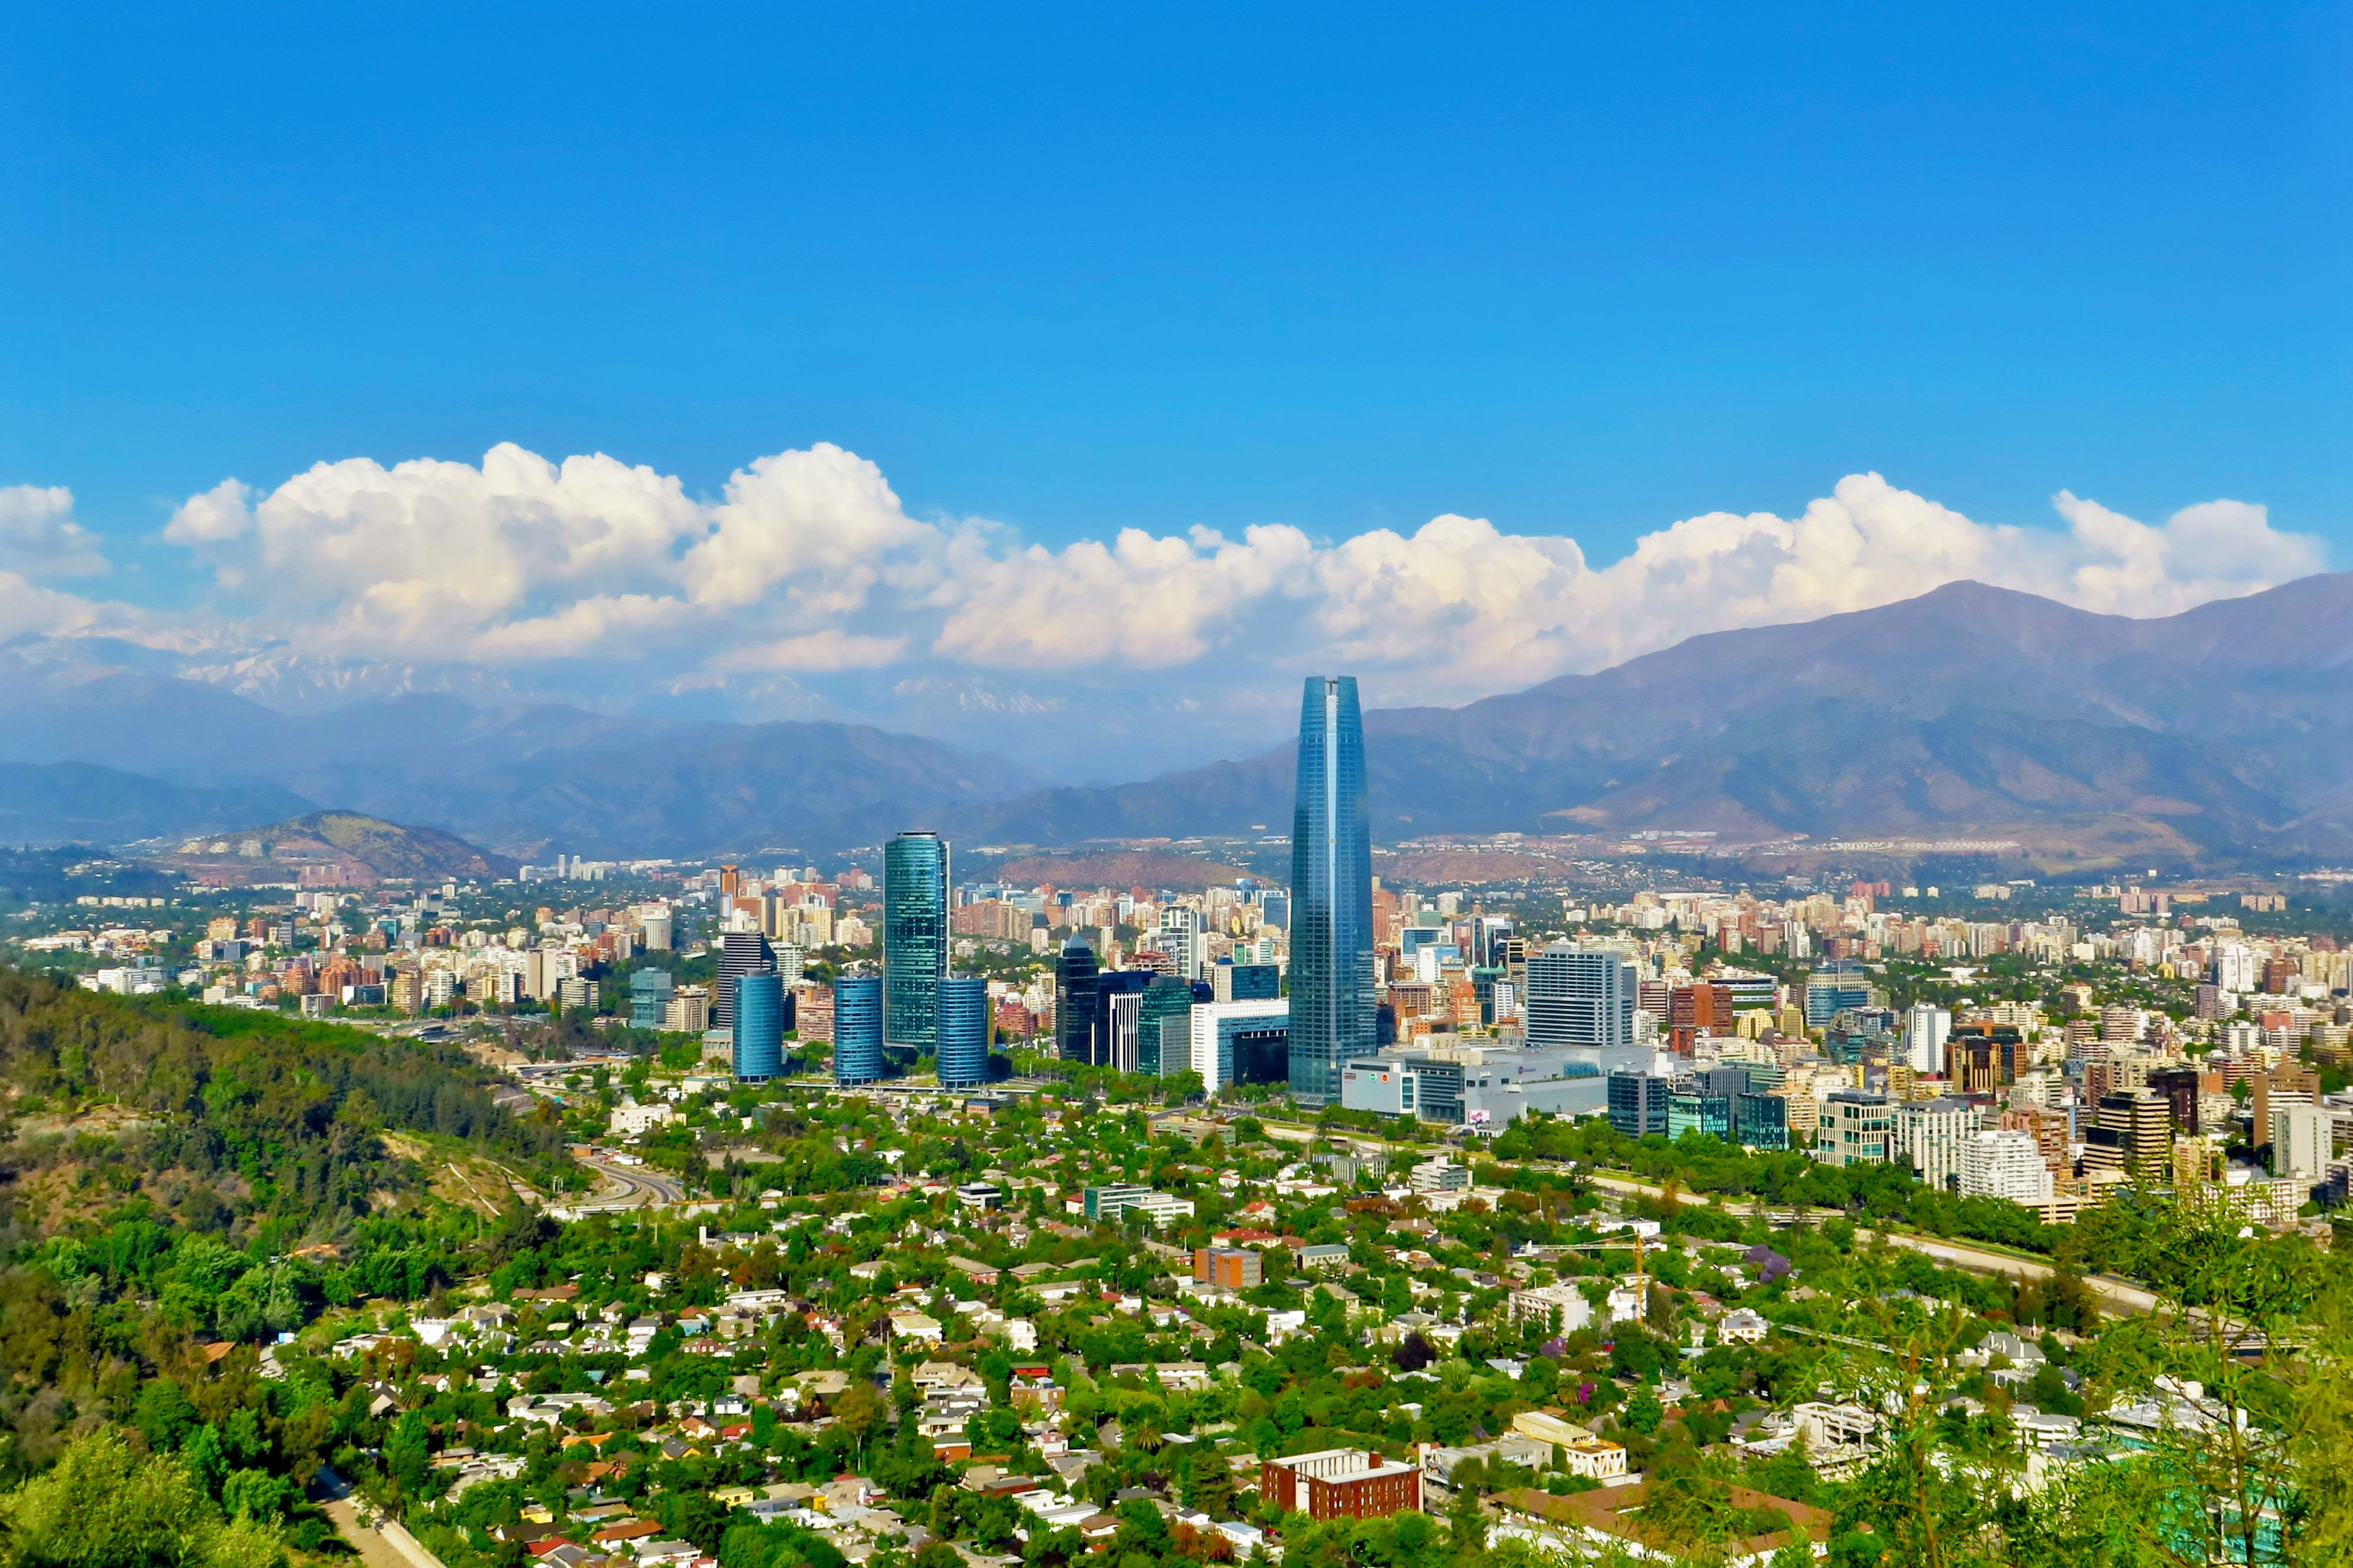 SURA Investment Management and Sencorp are about to complete the construction of a new project destined to become an icon for sustainability in both Chile and throughout the region